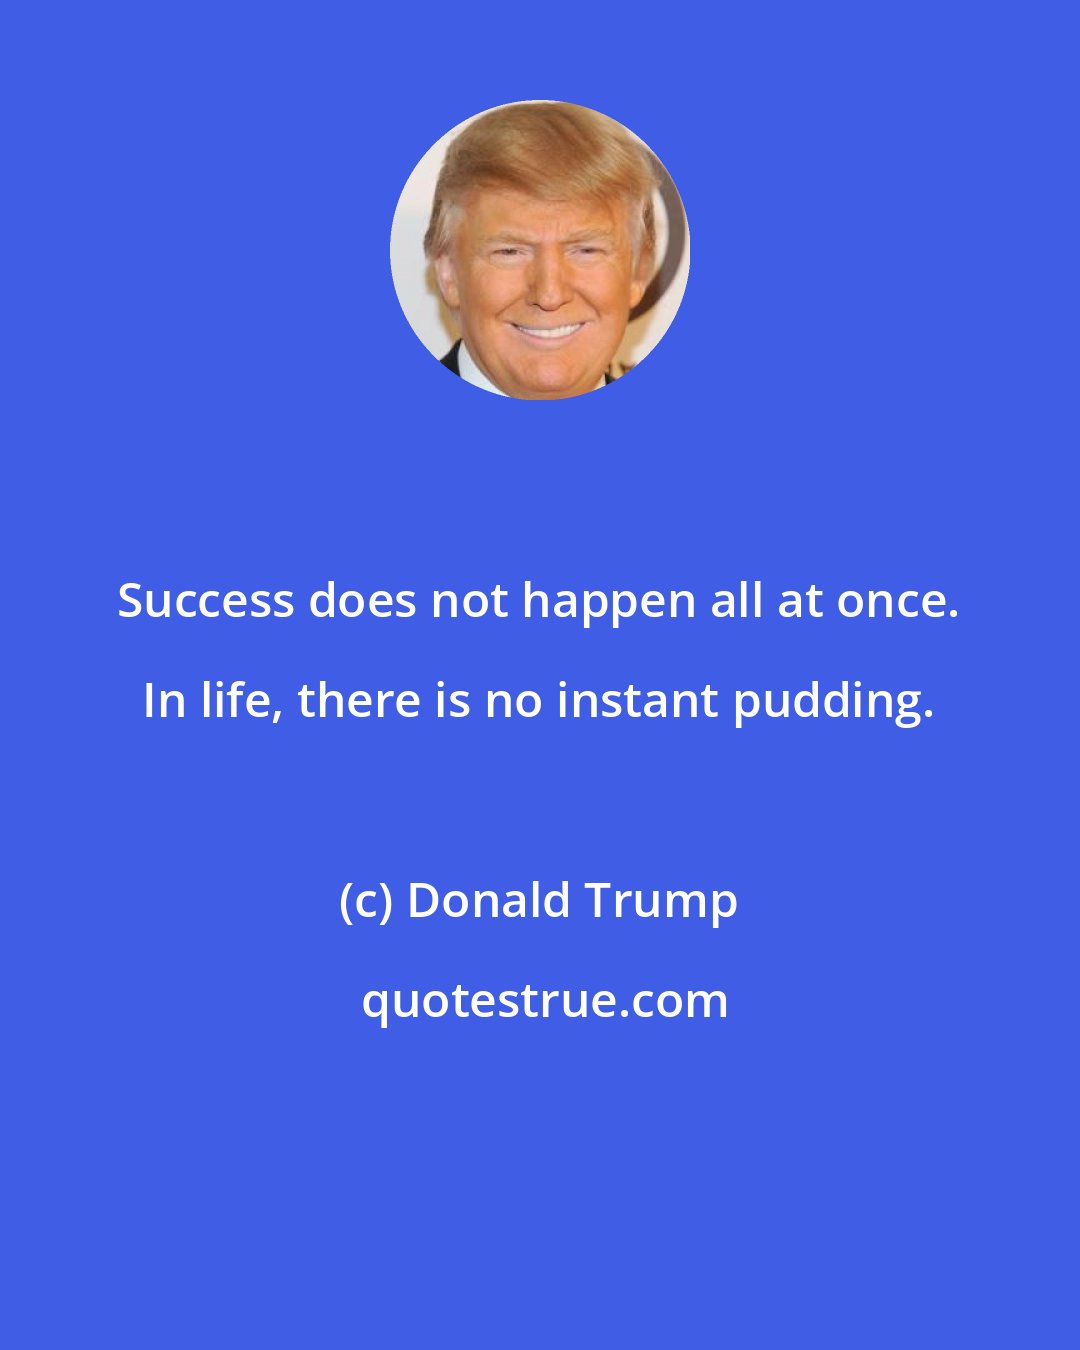 Donald Trump: Success does not happen all at once. In life, there is no instant pudding.